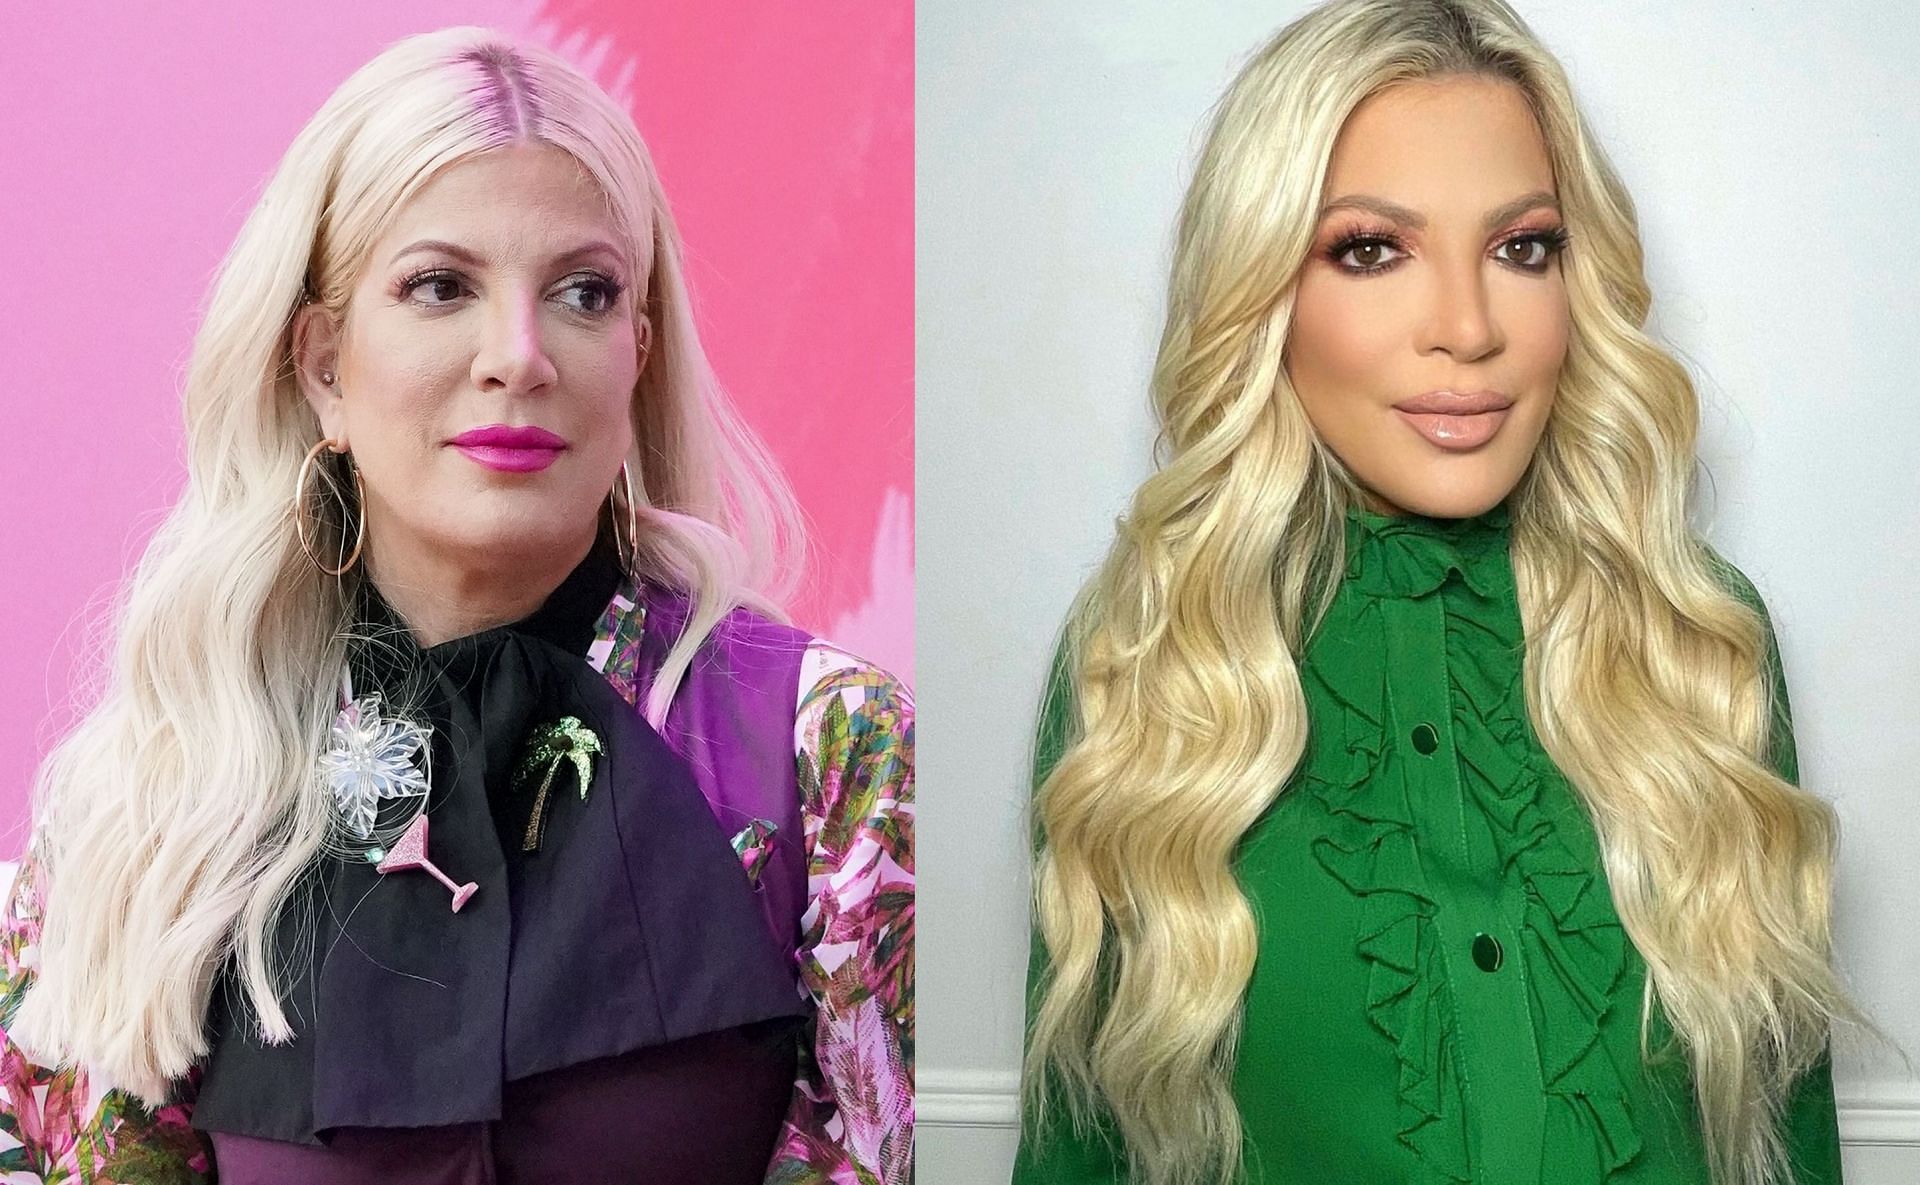 Tori Spelling is in fresh trouble with authorities (Image via Rachel Luna/Getty Images and Tori Spelling/Instagram)